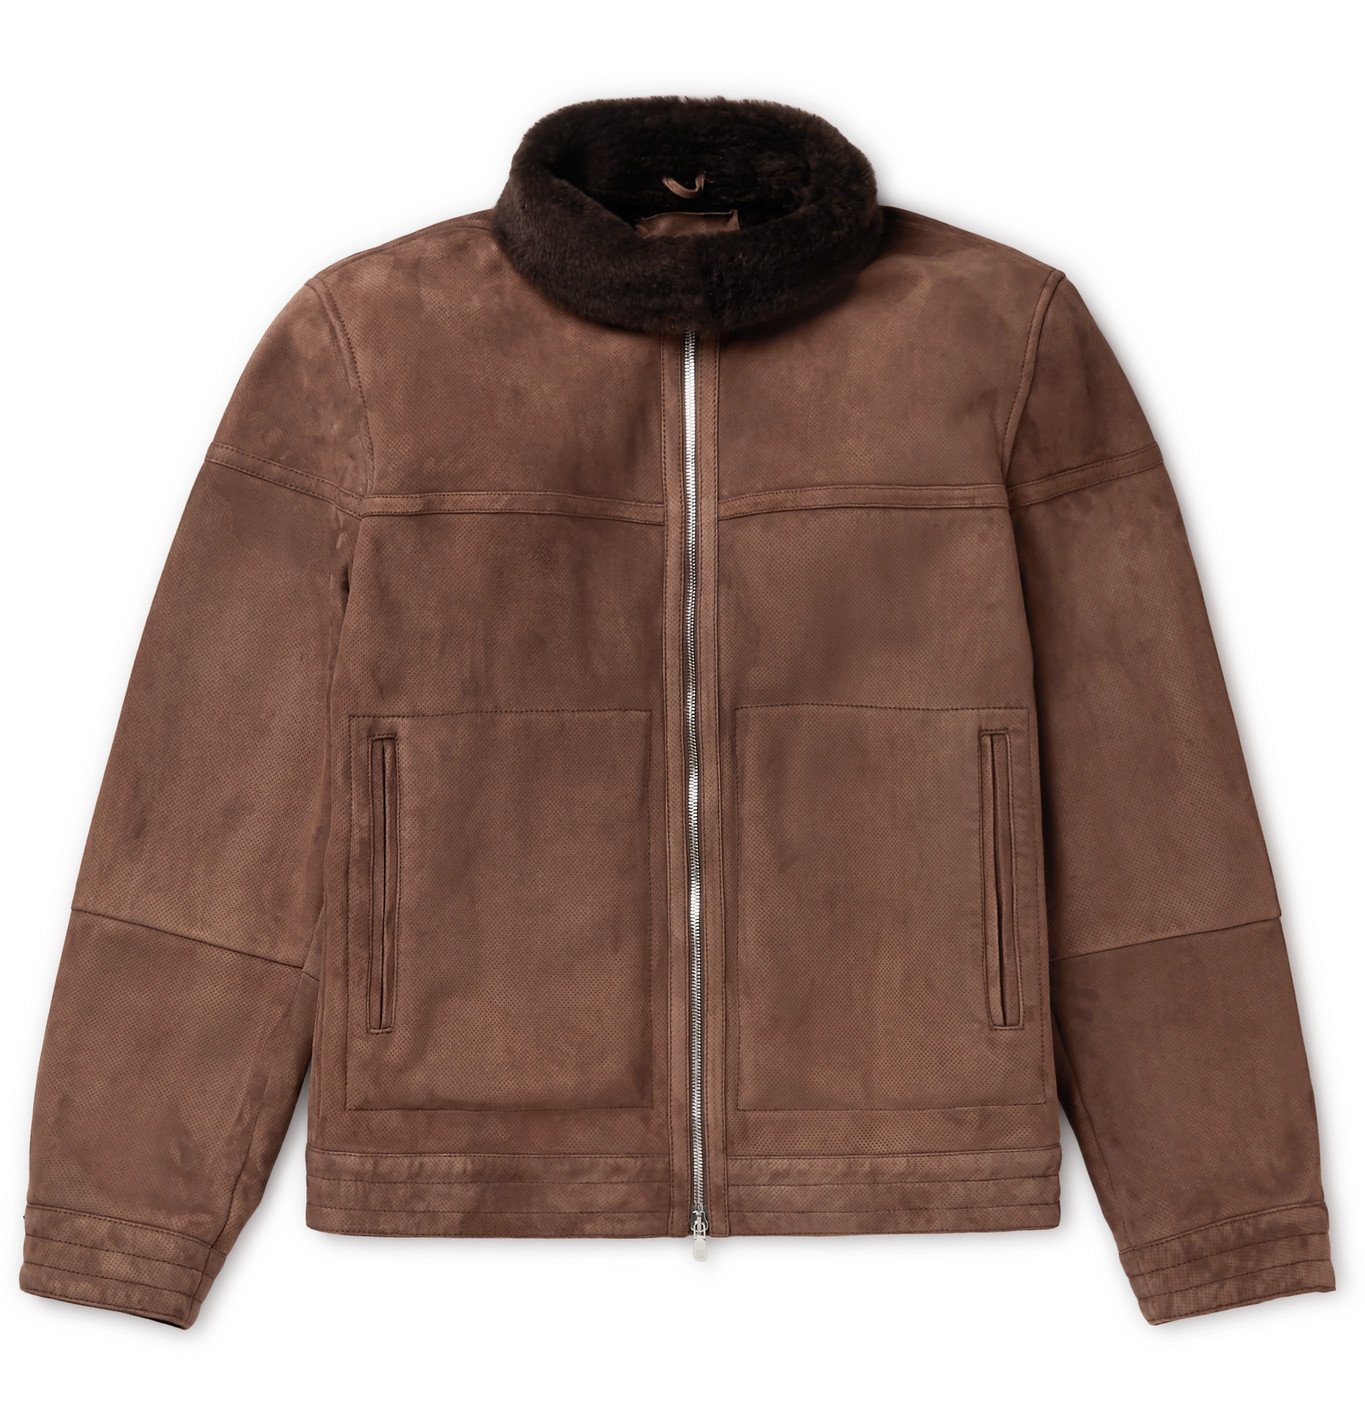 Brunello Cucinelli - Shearling-Lined Perforated-Suede Jacket - Brown ...